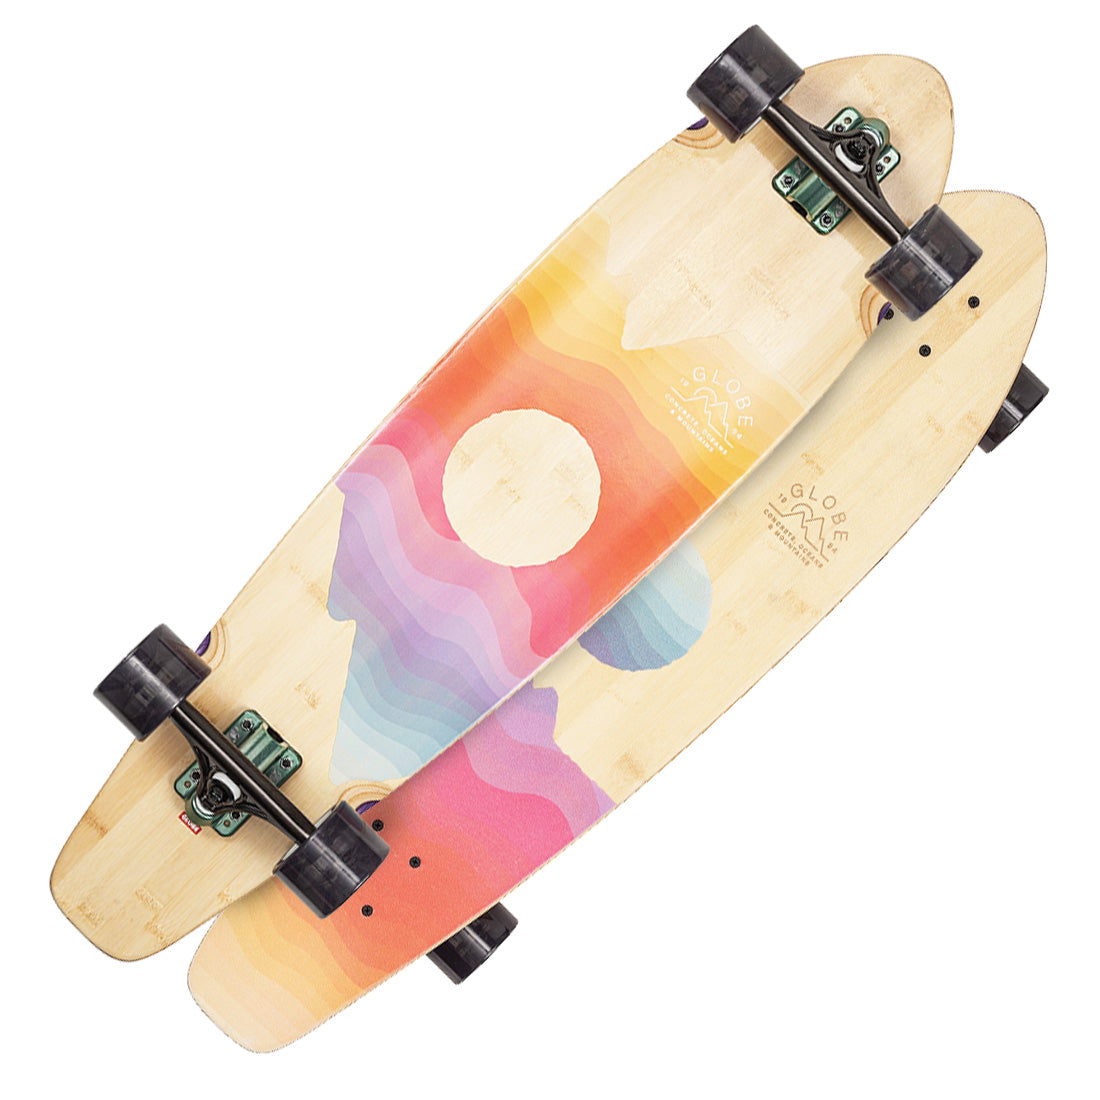 Globe Arcadia 36 Complete - Bamboo/Mountains Skateboard Completes Longboards